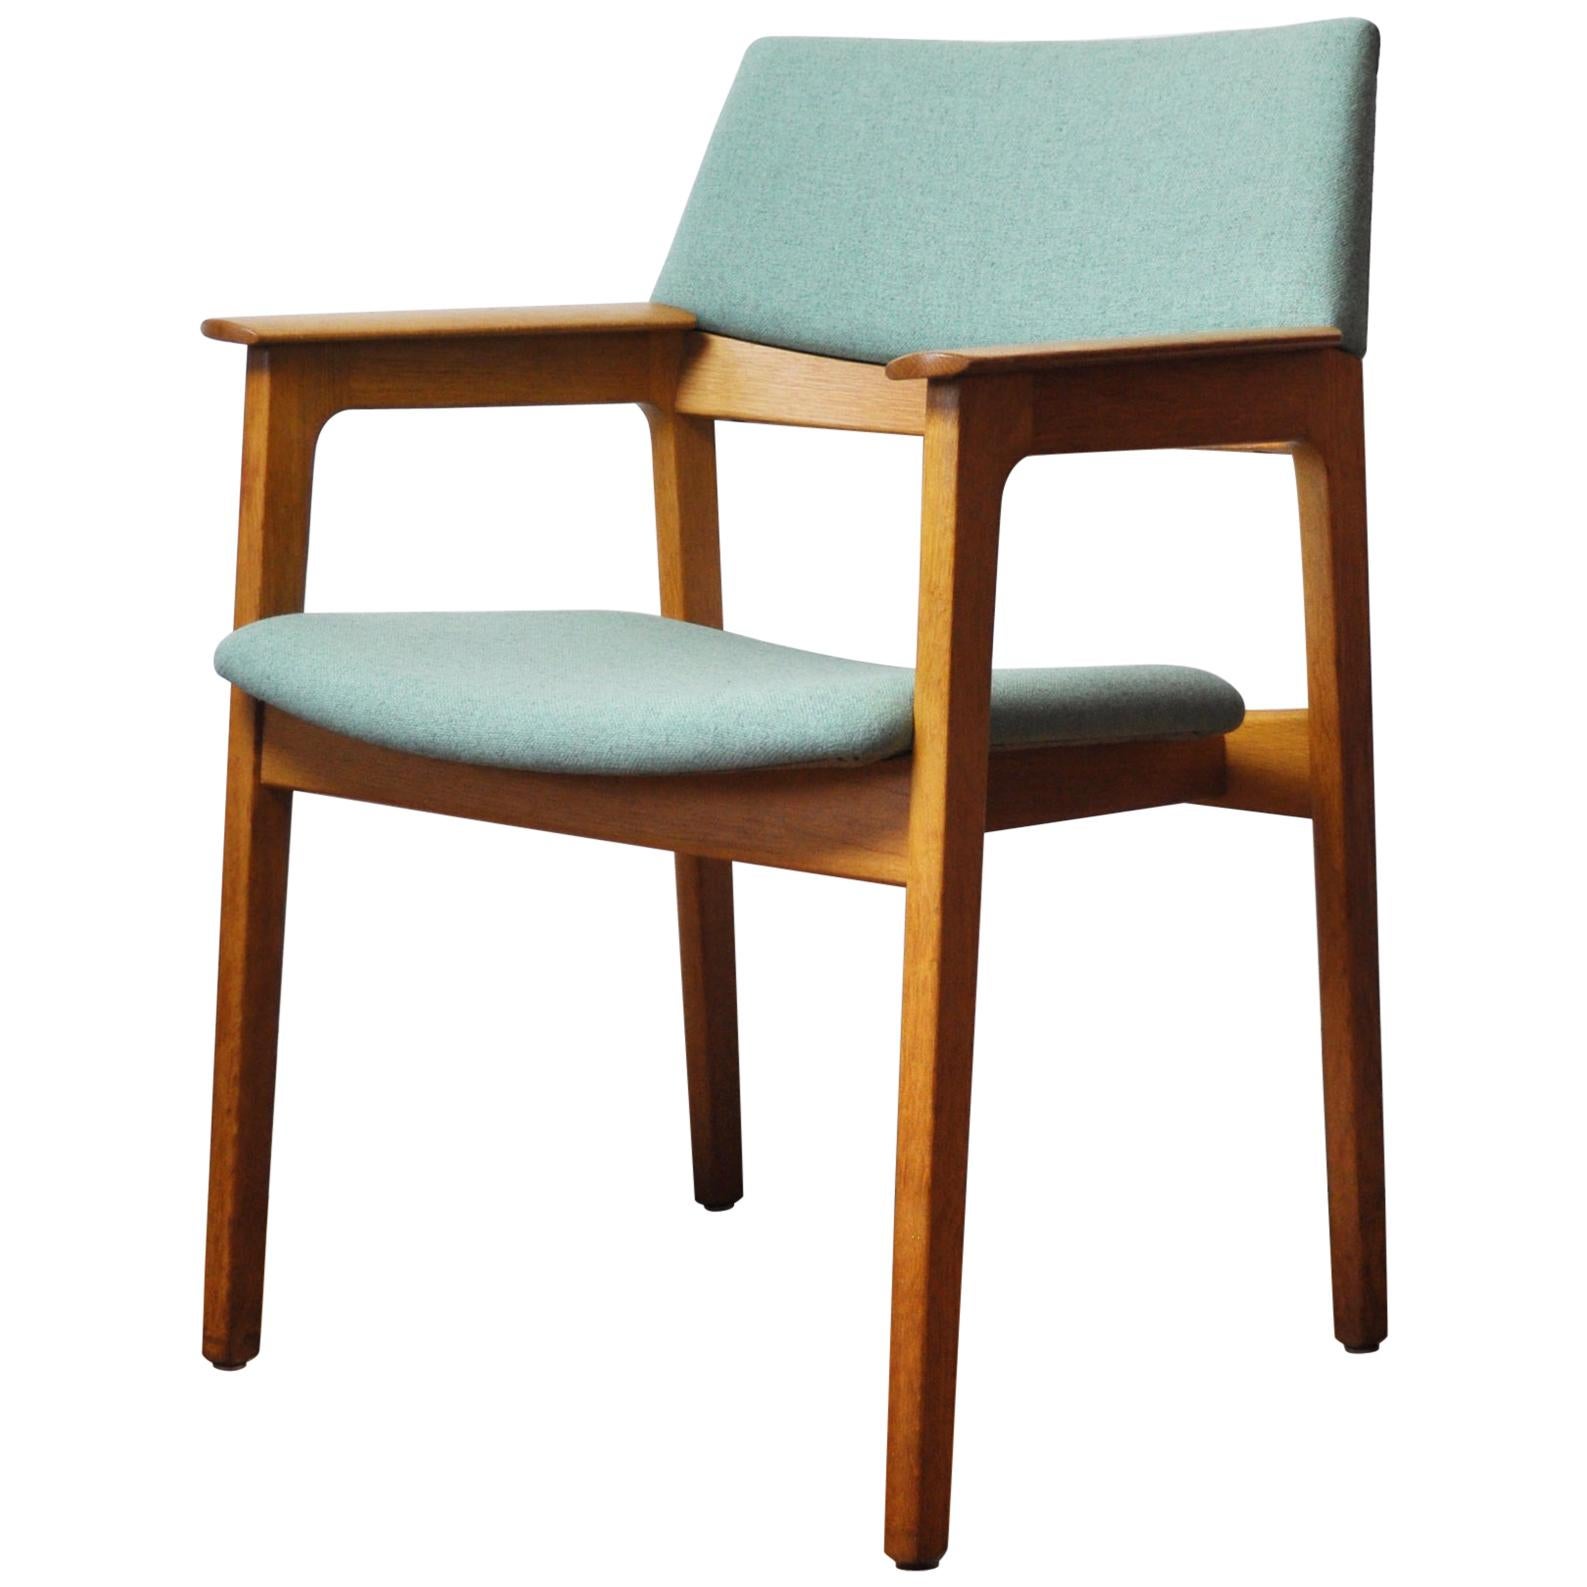 Danish Modern Armchair in Solid Oak with New Upholstery, 1960s For Sale